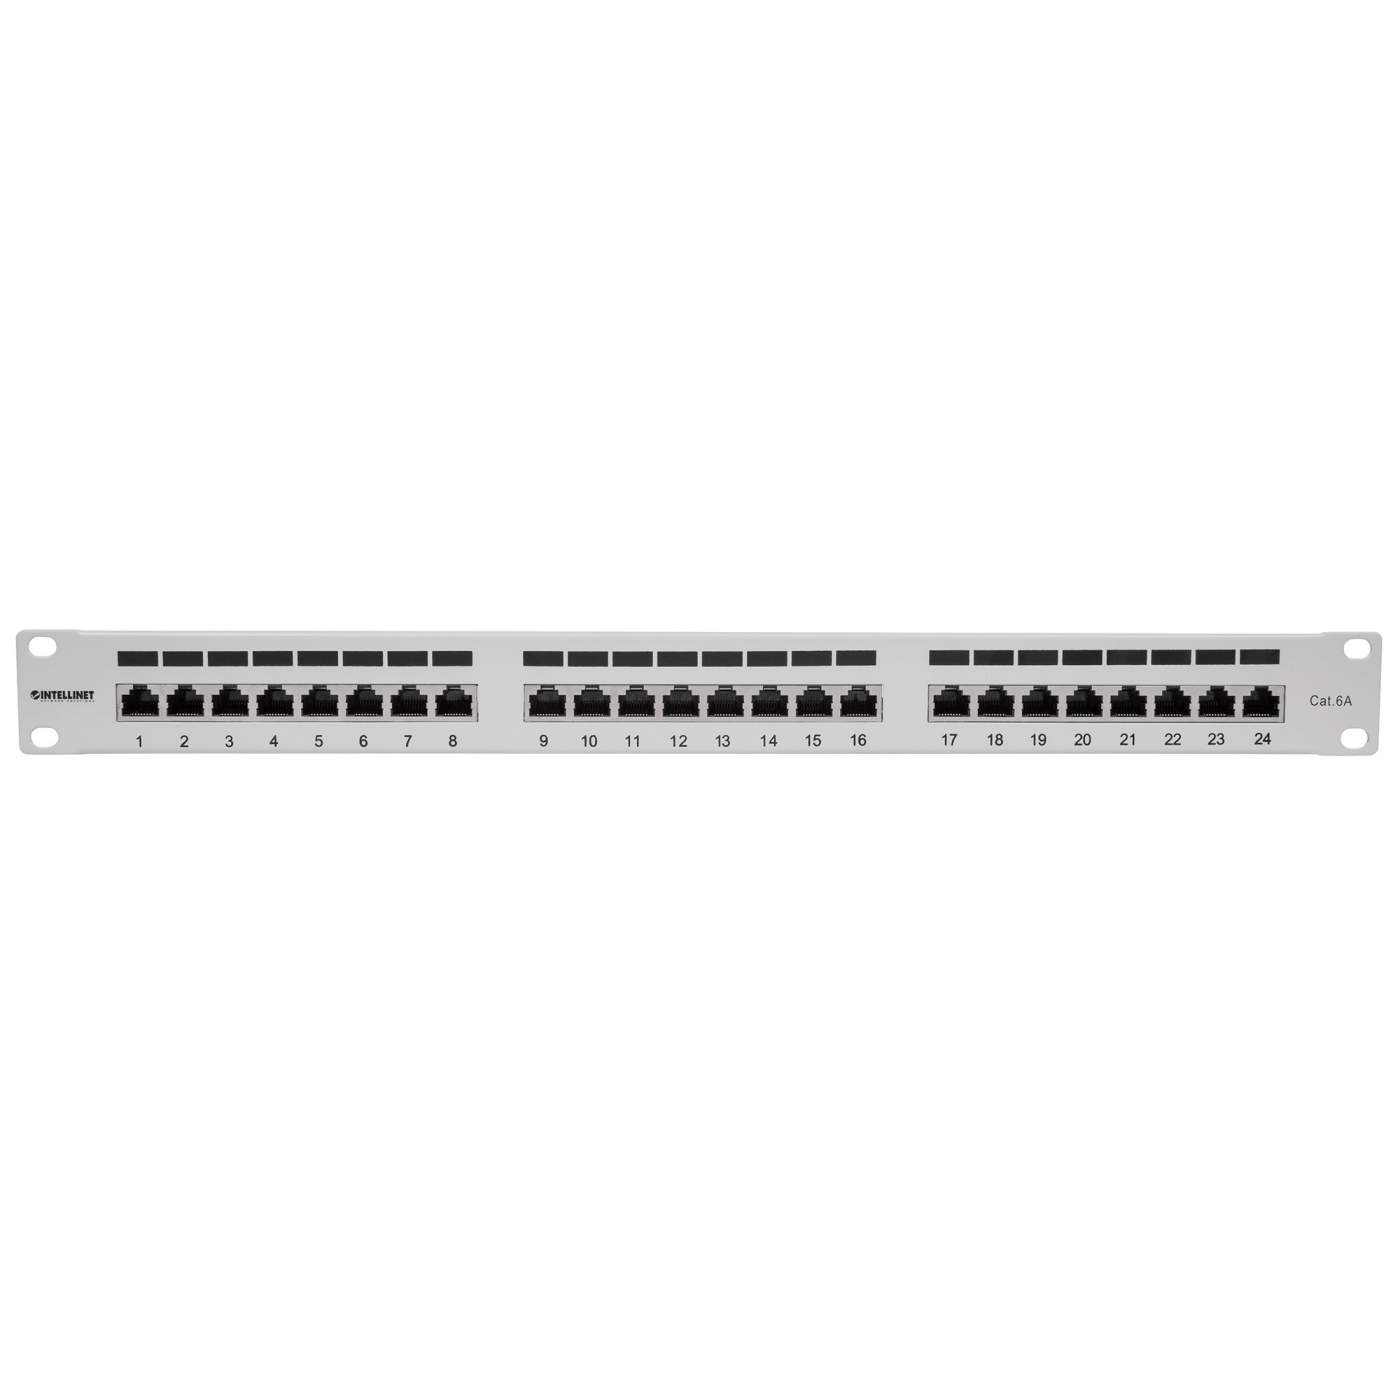 Cat6a Shielded Patch Panel Image 3